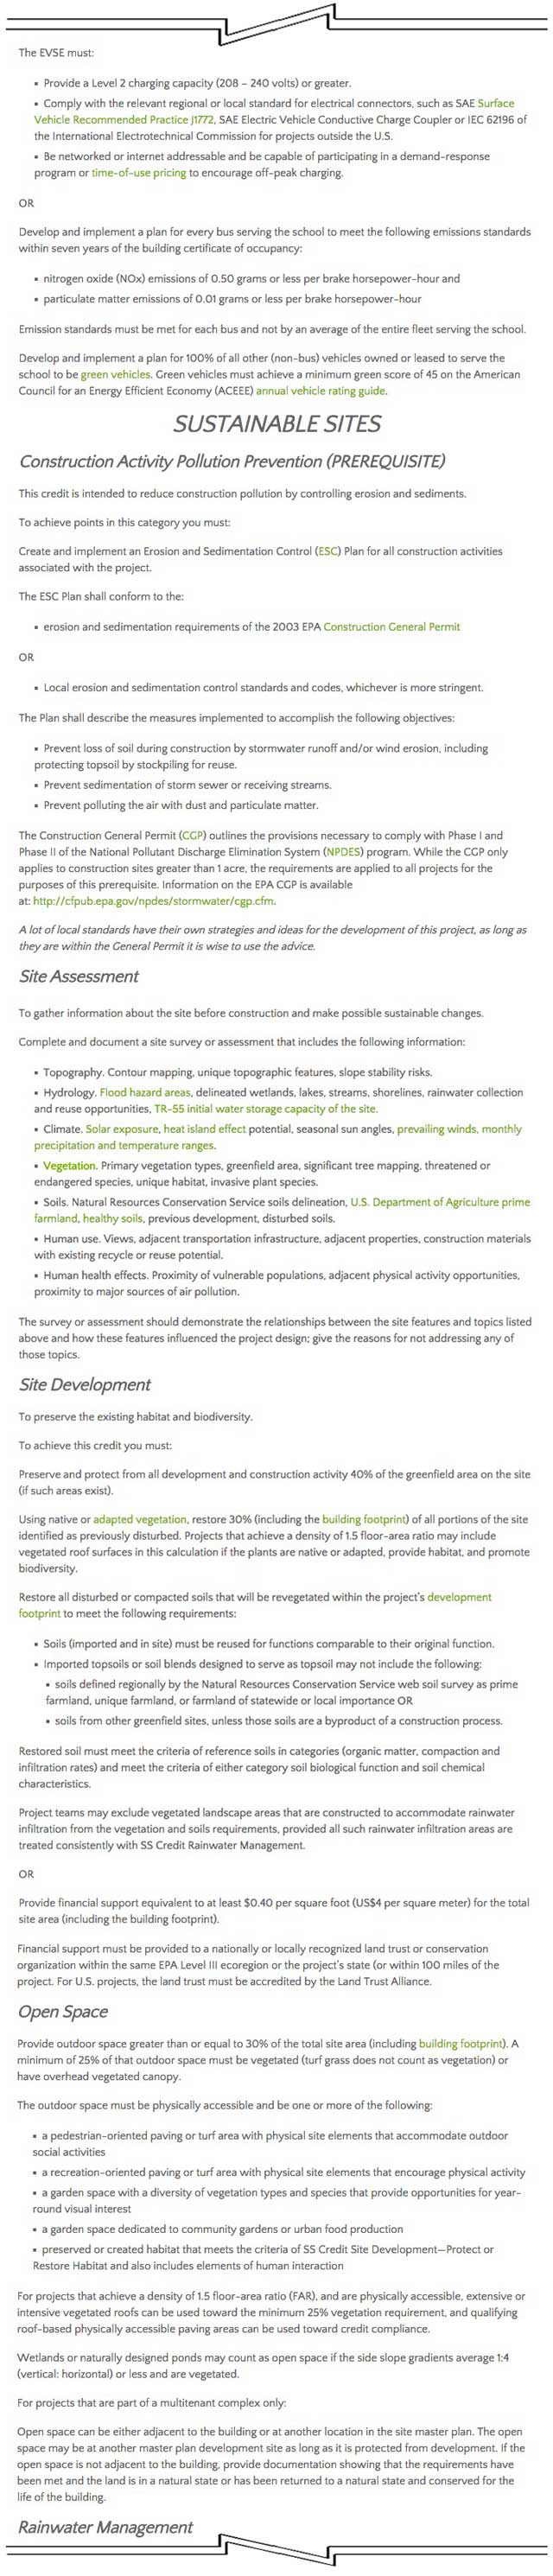 Jacky Tustain (Project Manager) also continued helping us convert the LEED Certification research done by Matheus Manfredini (Civil Engineering Student and Urban Design Coordinator) into a webpage. Here are the 4th round of pictures of this LEED Tutorial page developing on the site, continuing with formatting and content editing. We’d say we’re about 50% complete with this tutorial.